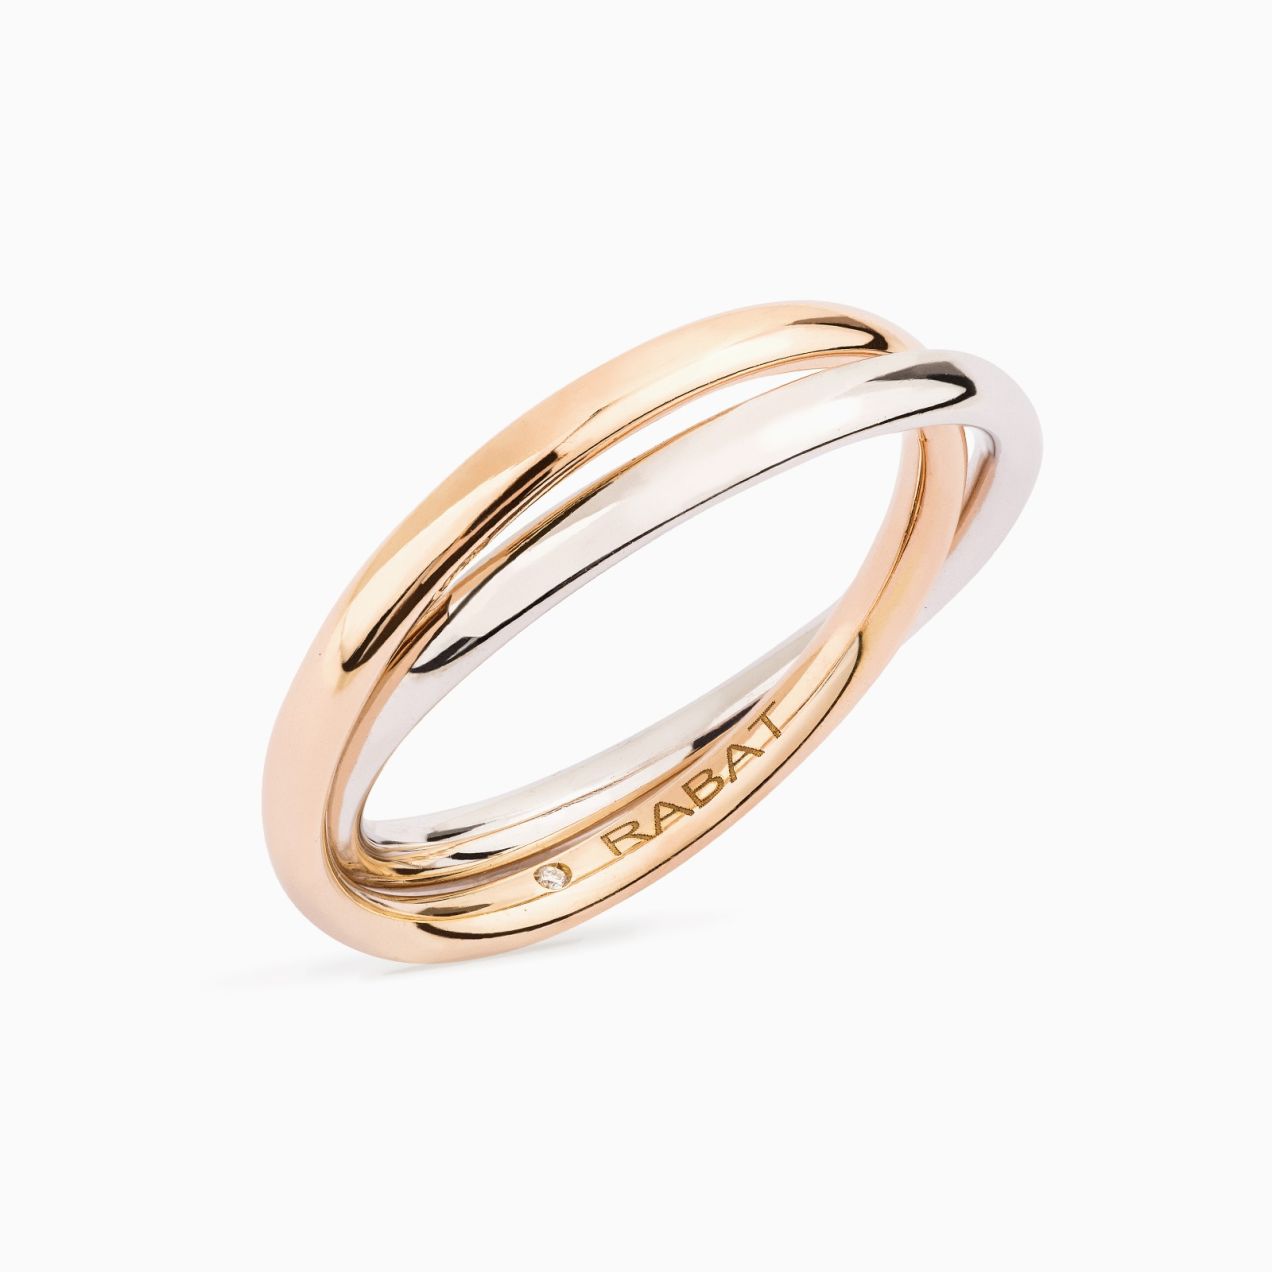 18K rose gold and white gold double wedding band ring